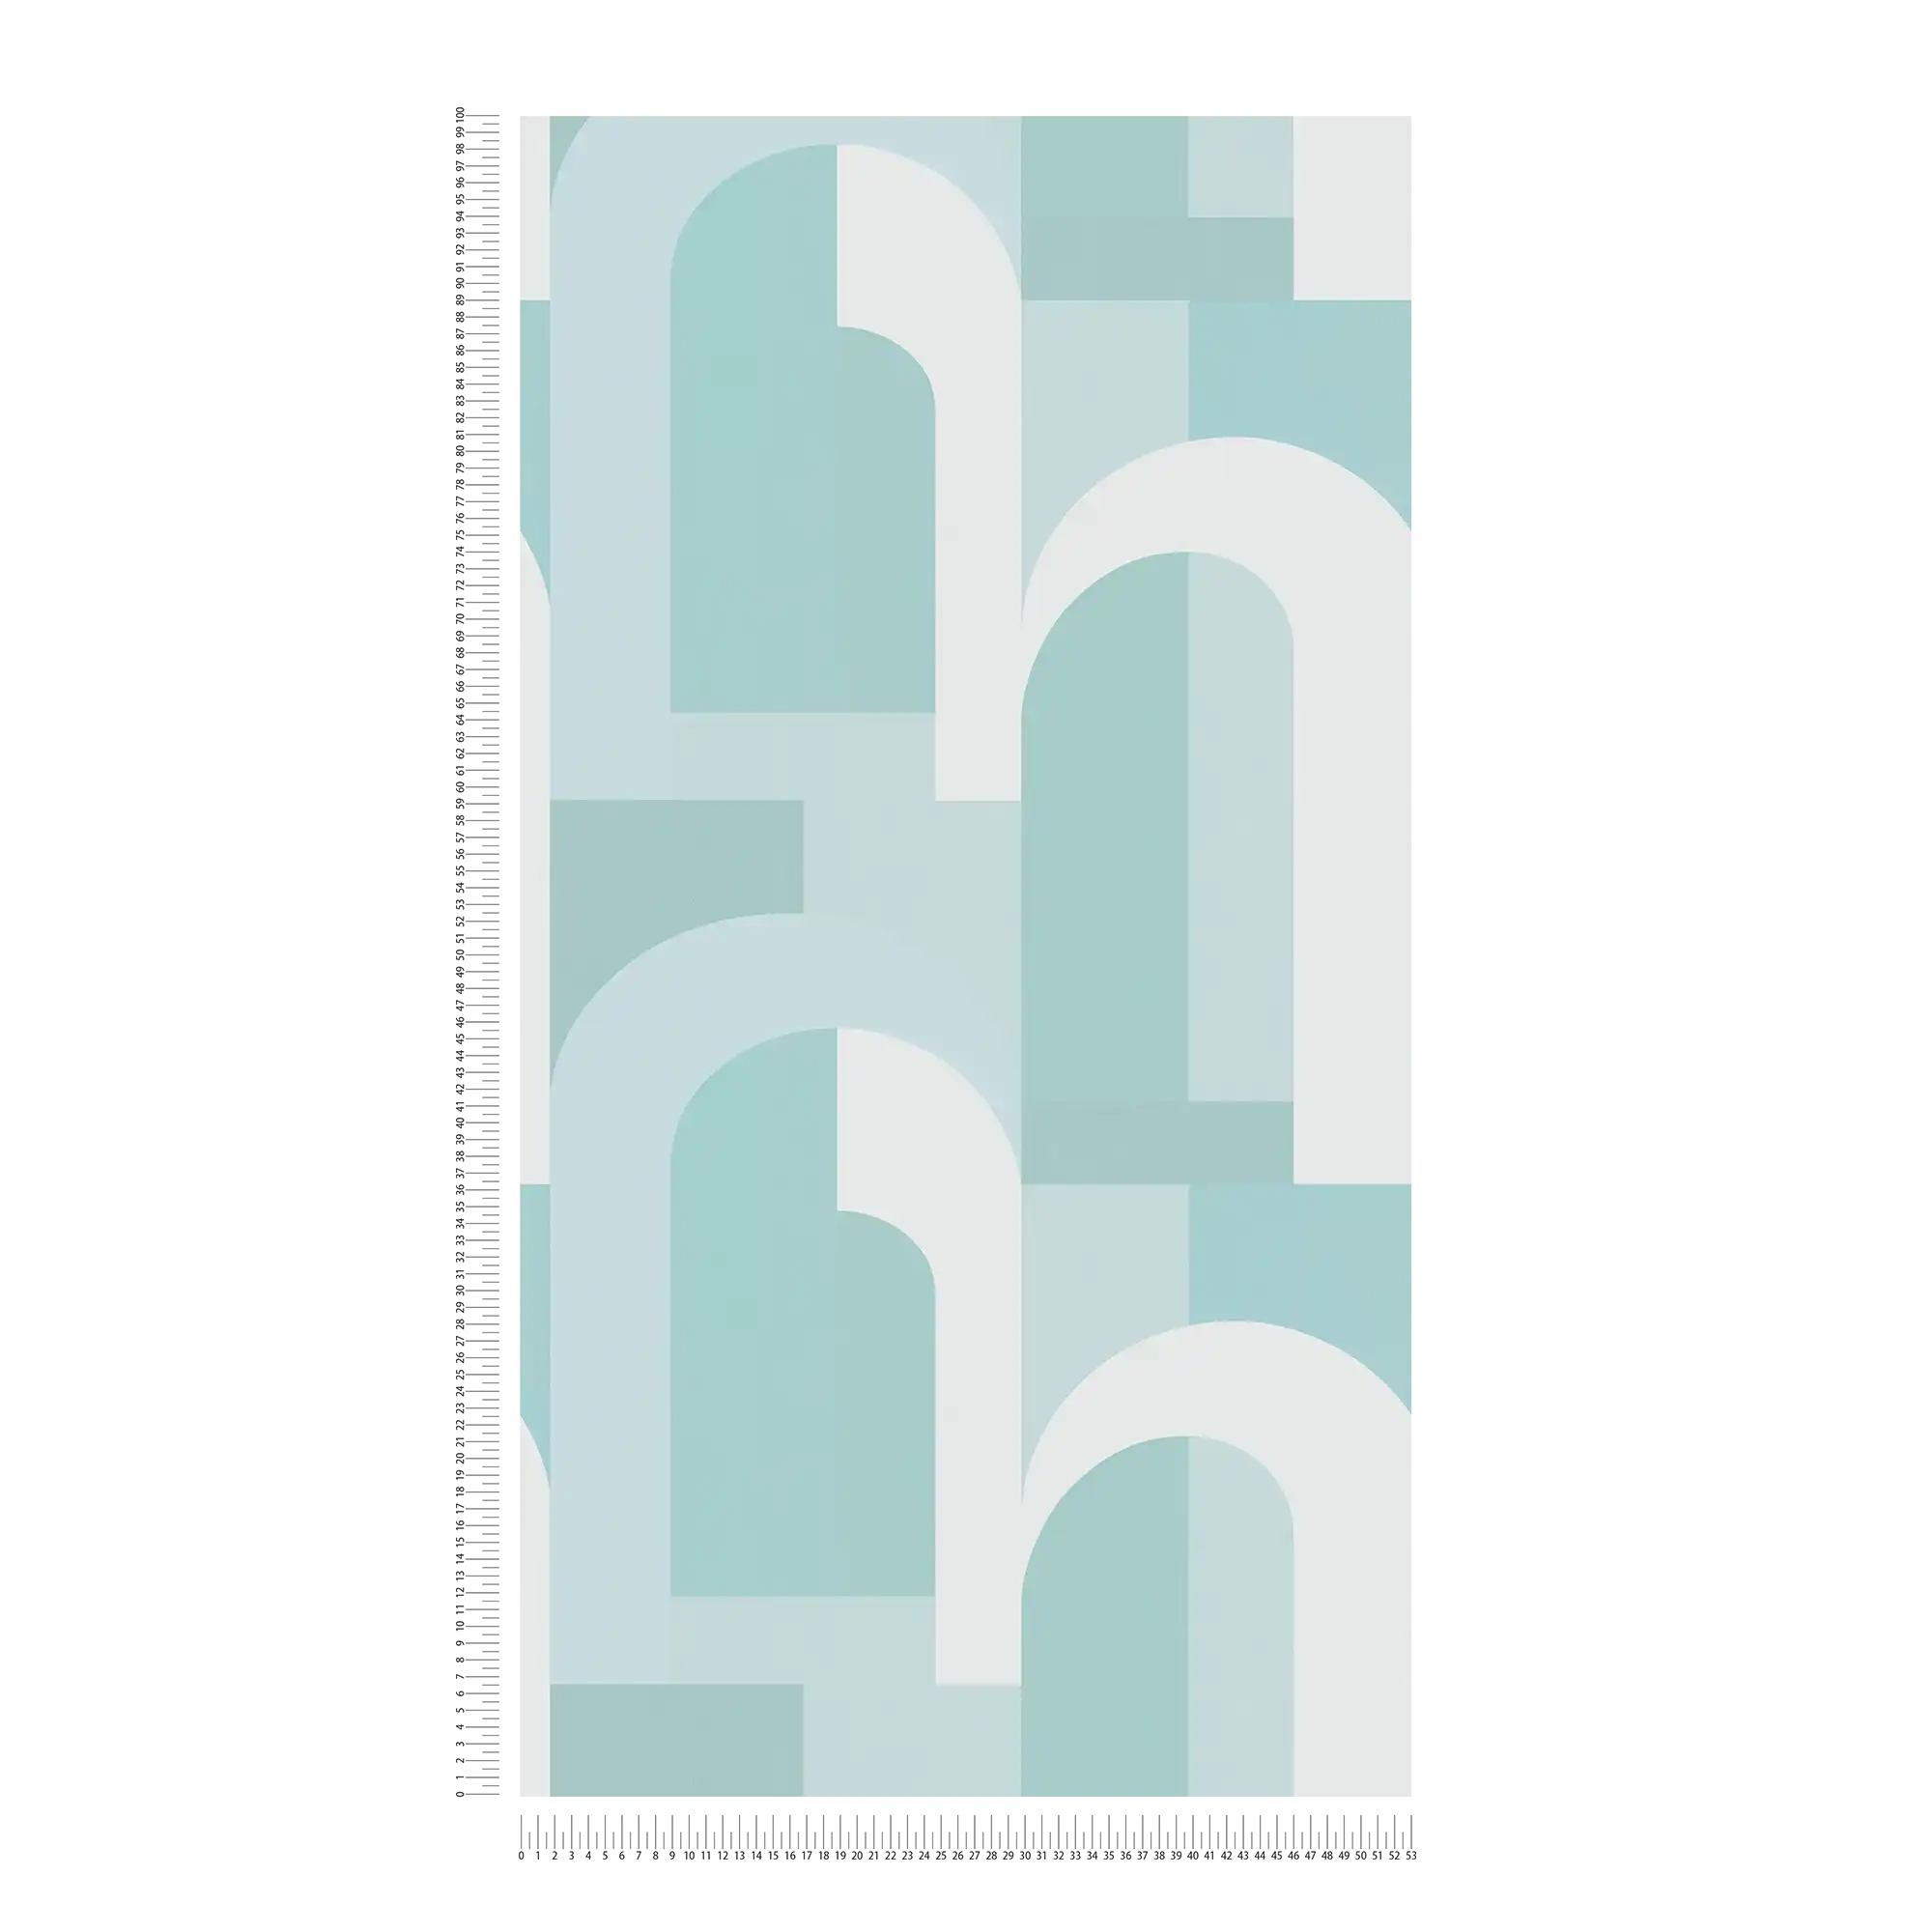             Graphic wallpaper with bow pattern - turquoise, white
        